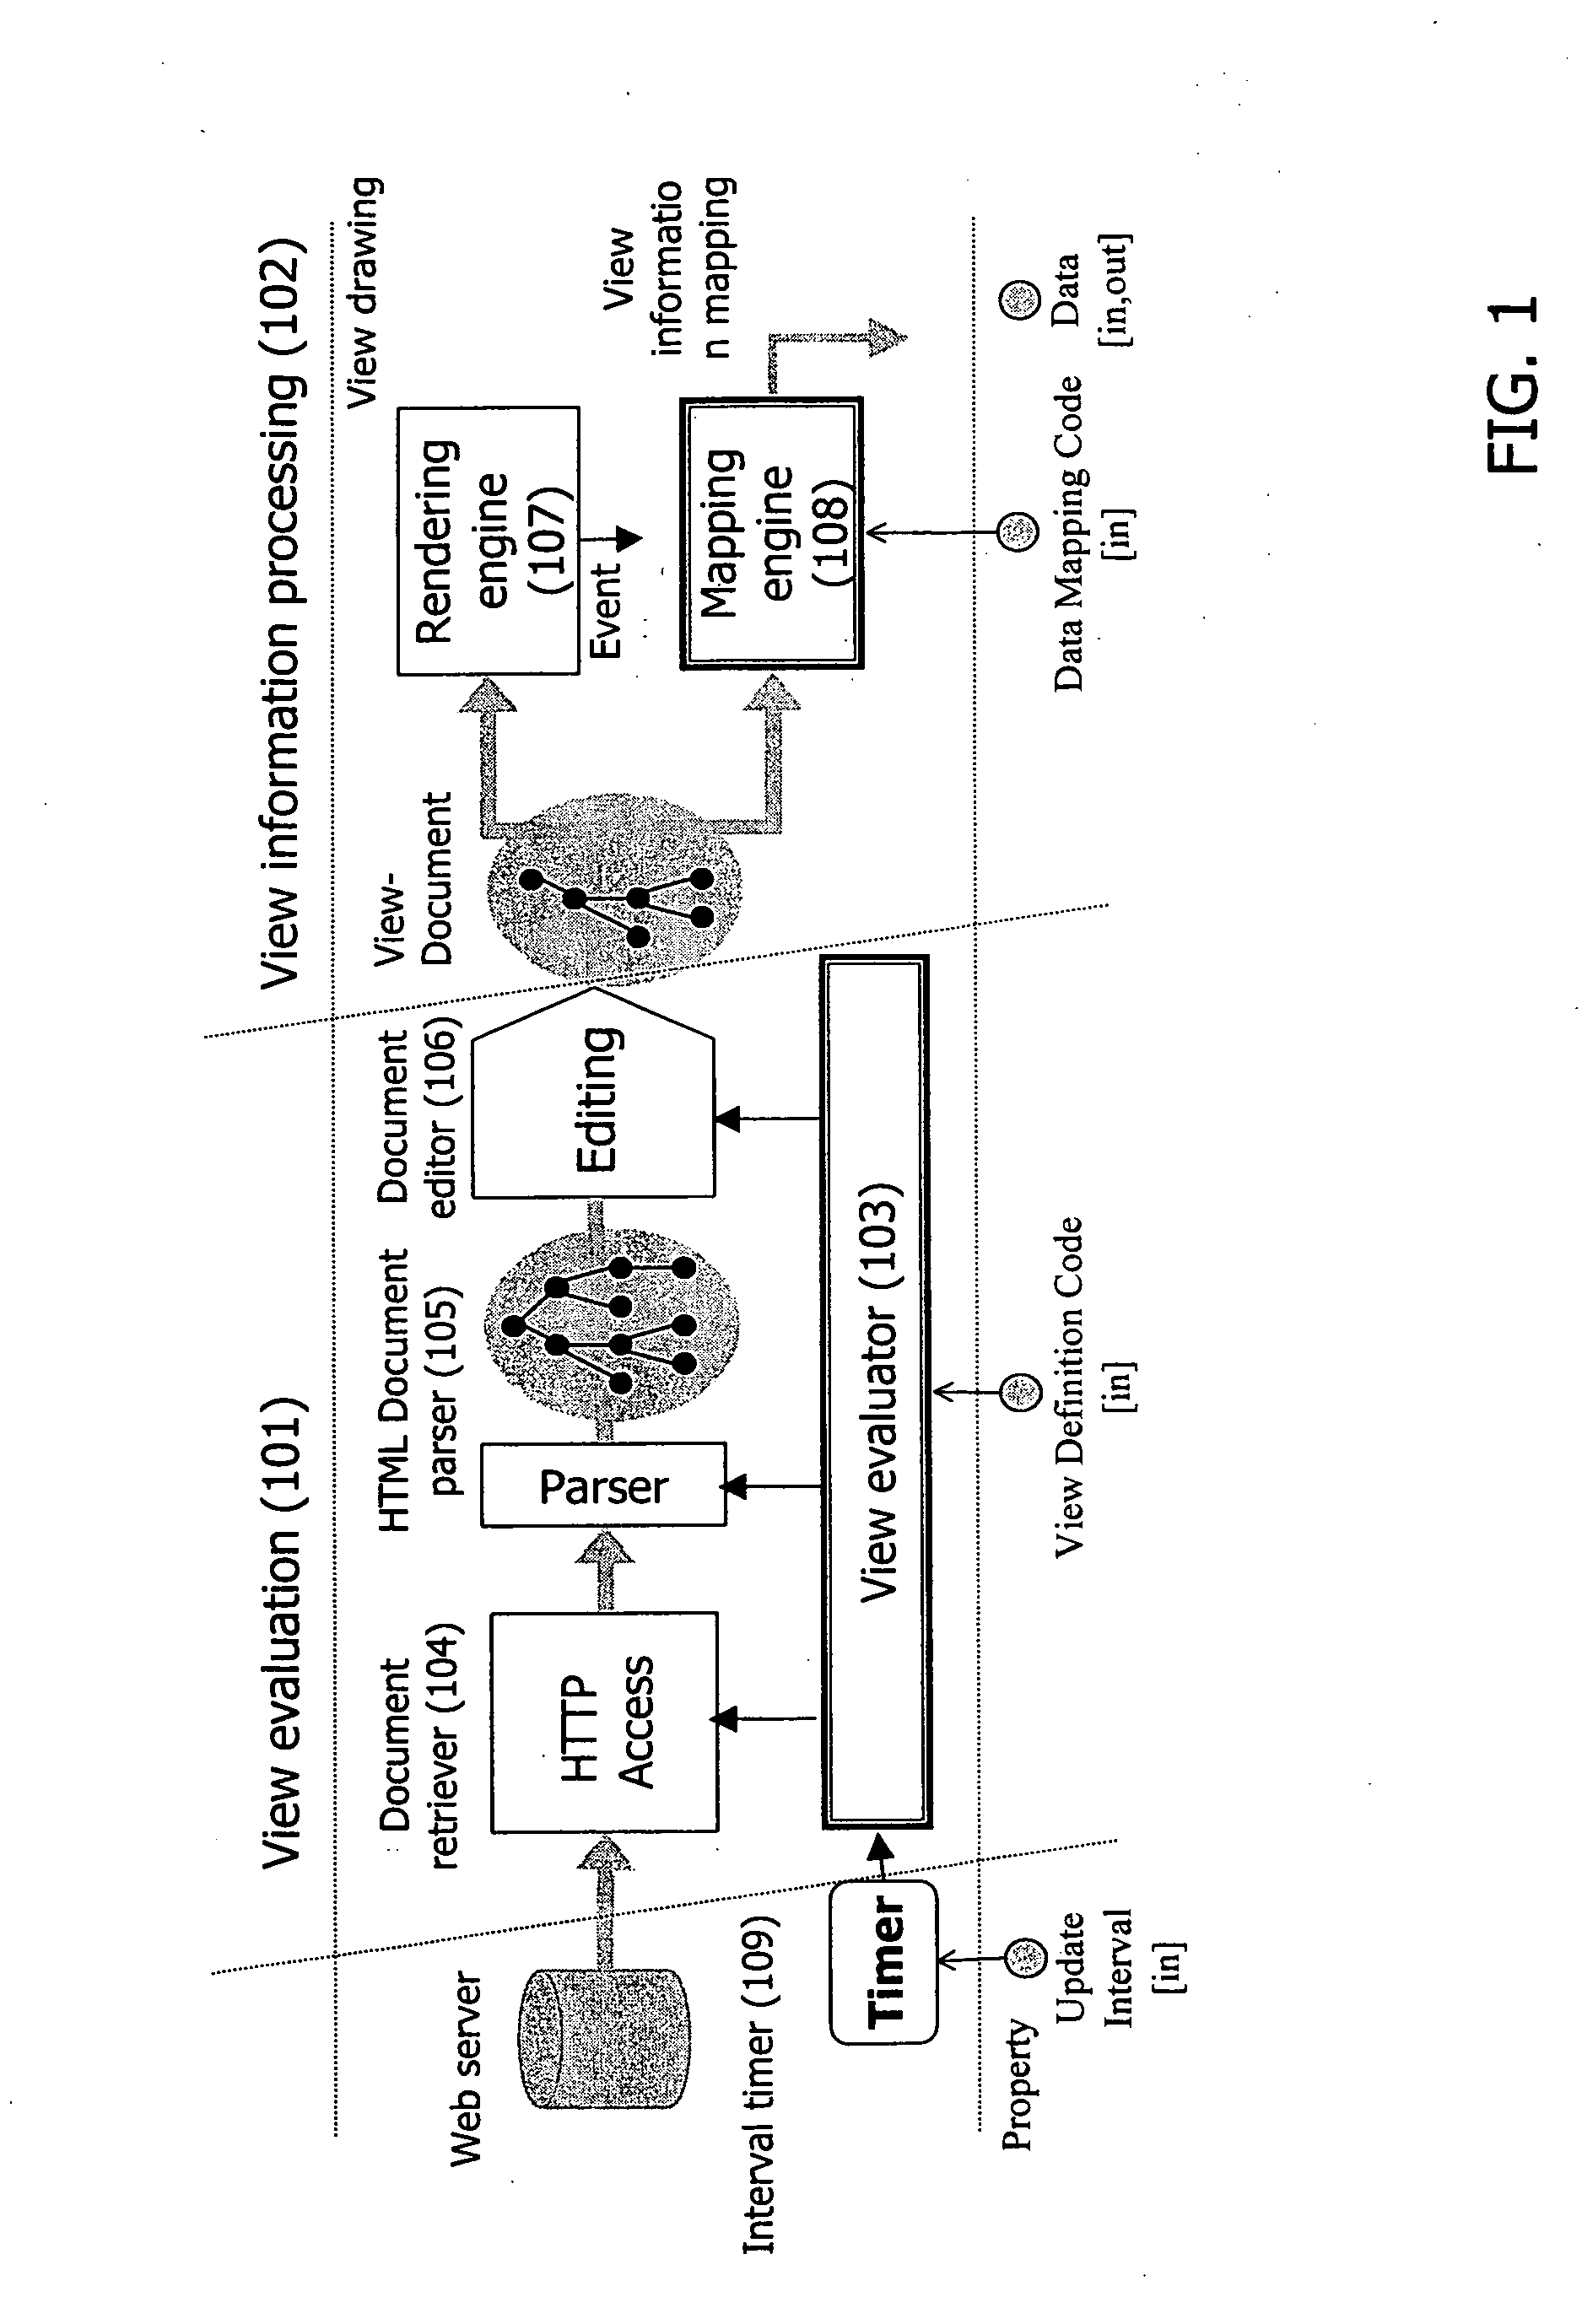 Method and apparatus for re-editing and redistributing web documents